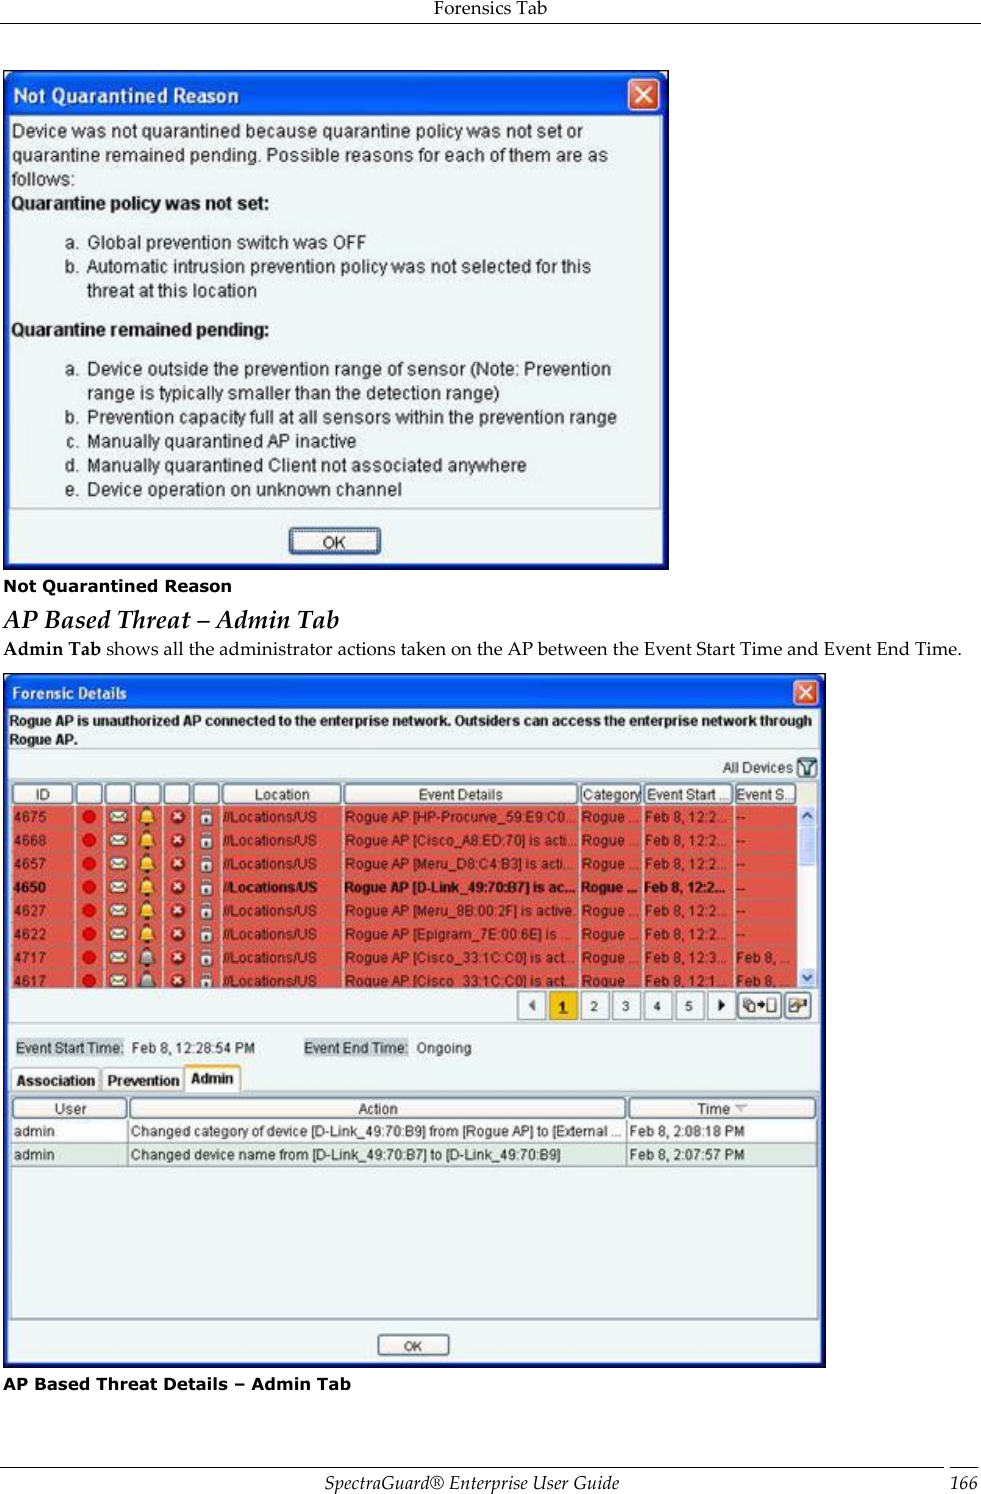 Forensics Tab SpectraGuard®  Enterprise User Guide 166  Not Quarantined Reason AP Based Threat – Admin Tab Admin Tab shows all the administrator actions taken on the AP between the Event Start Time and Event End Time.  AP Based Threat Details – Admin Tab 